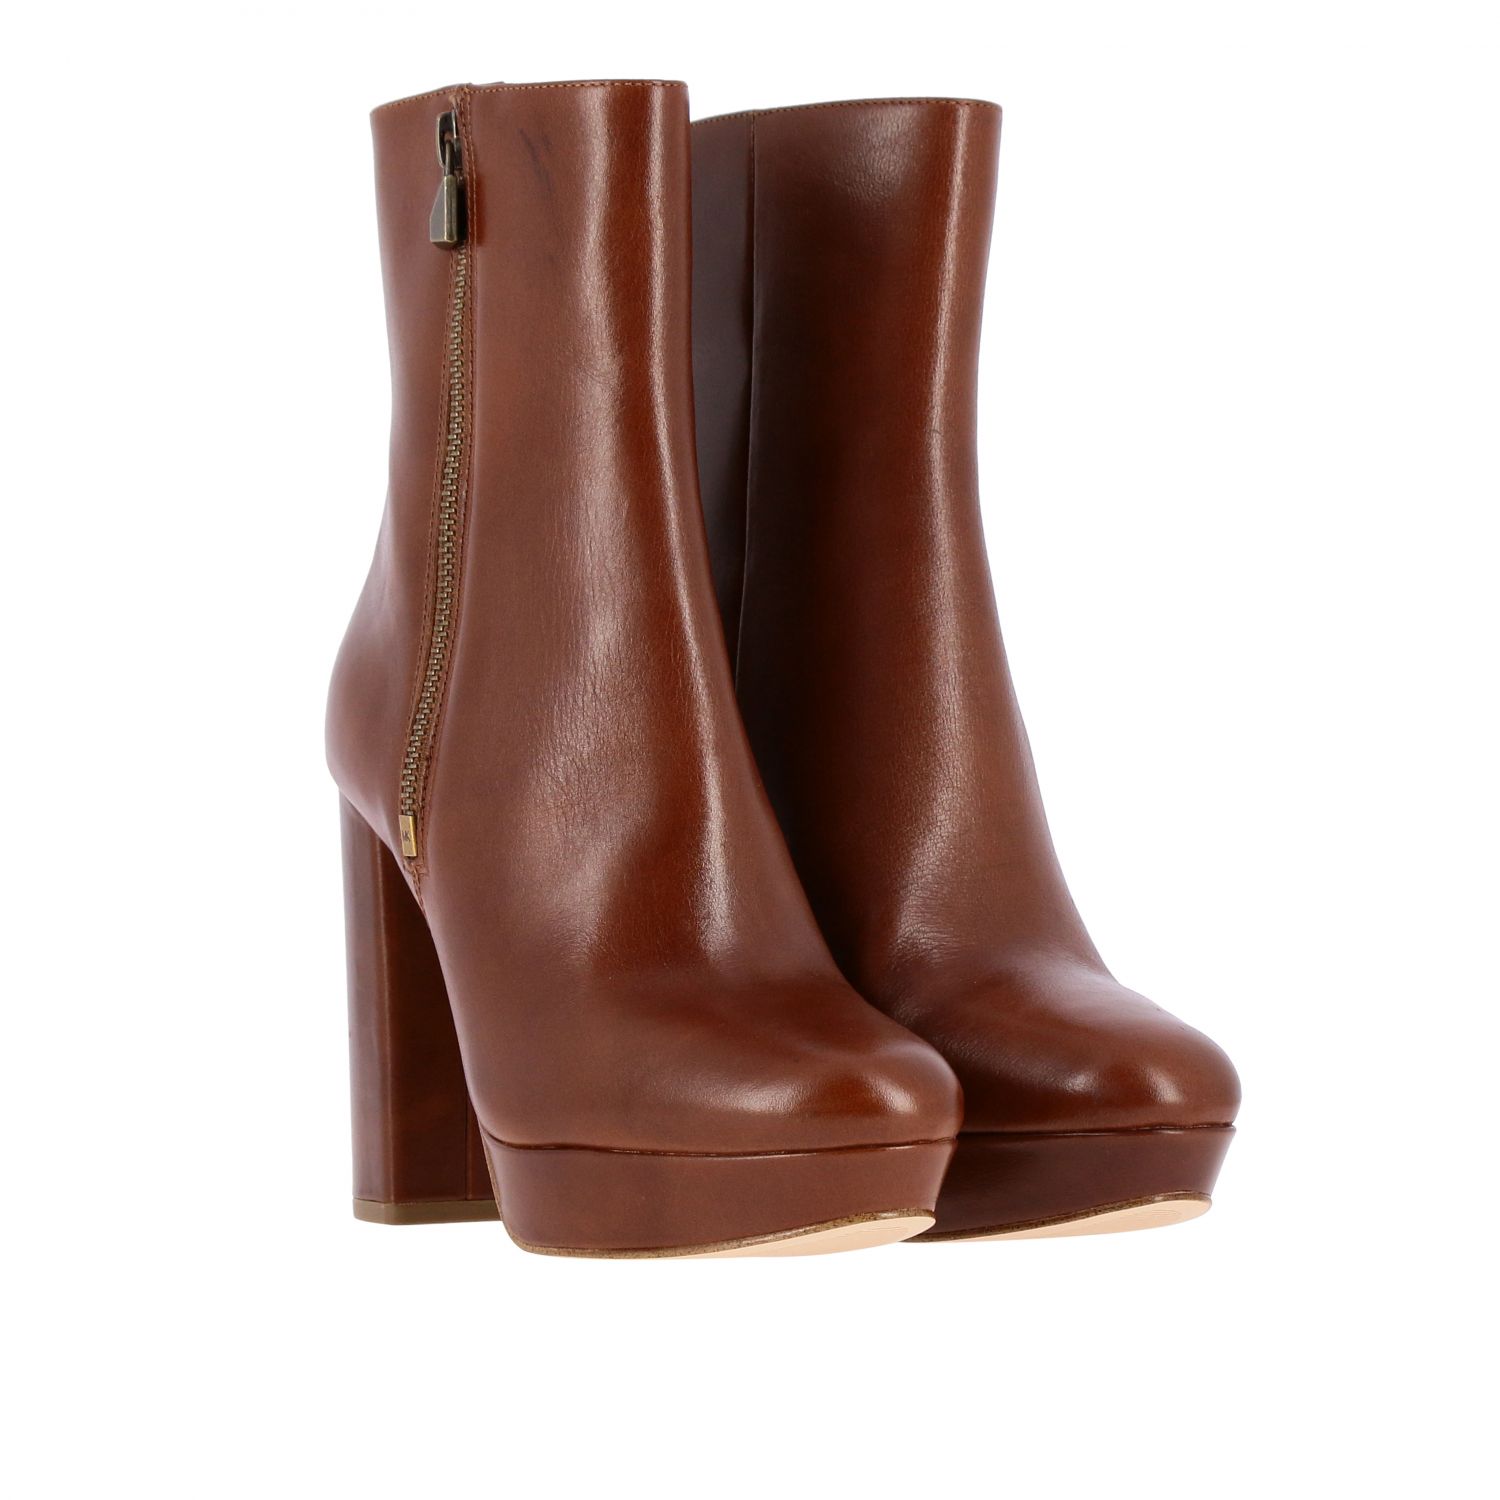 Michael Michael Kors Outlet: Frenchie leather ankle boots | Heeled ...